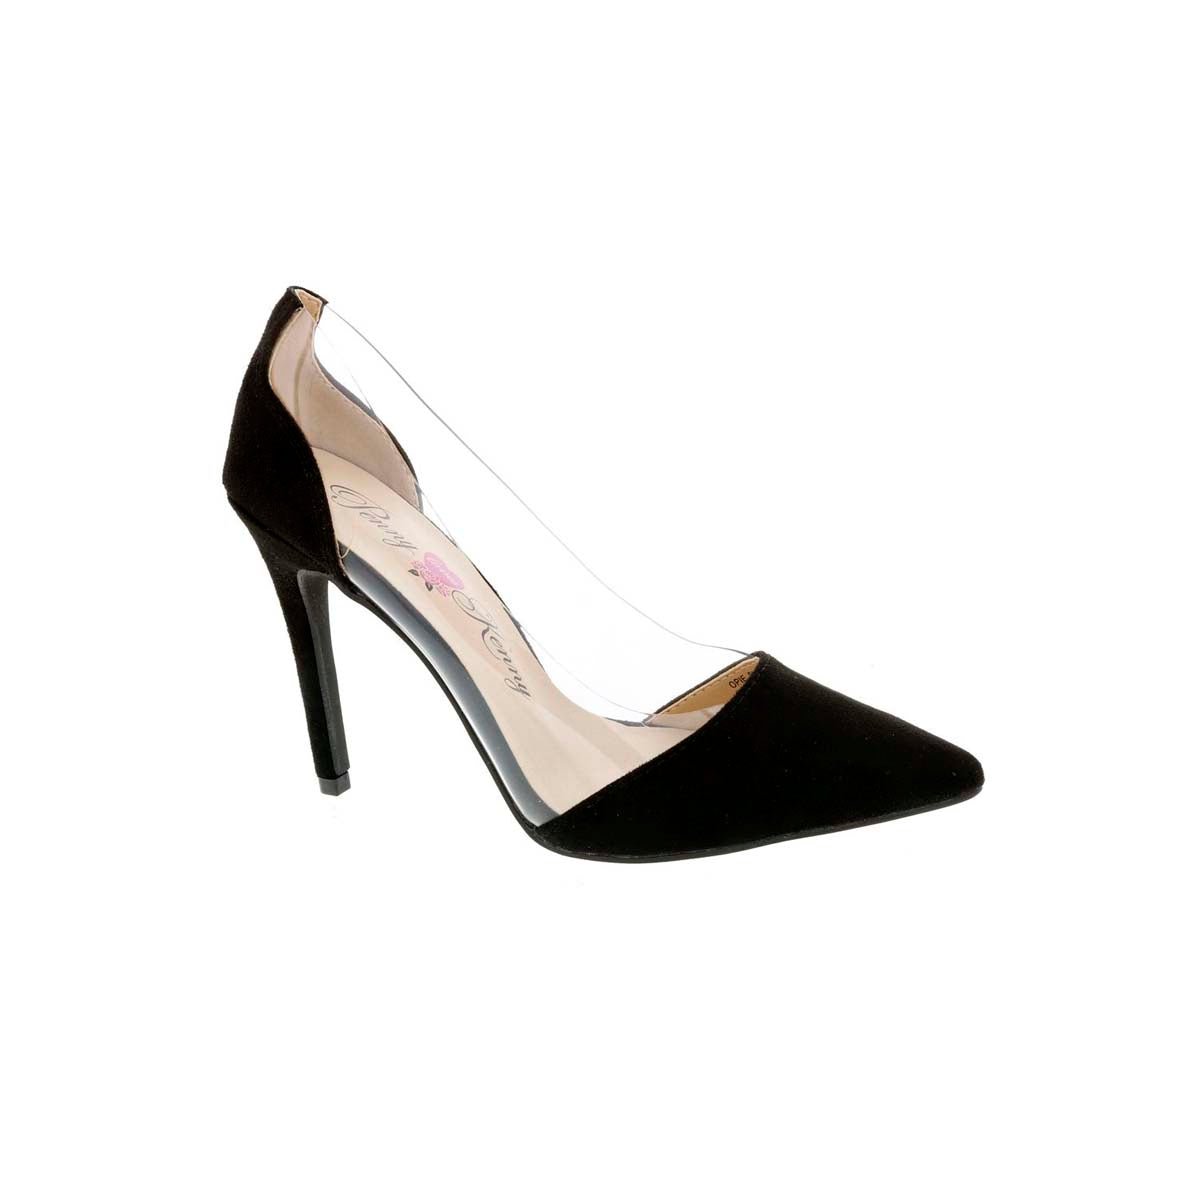 PENNY LOVES KENNY OPIE WOMEN PUMPS SHOE IN BLACK MICRO/LUCITE - TLW Shoes